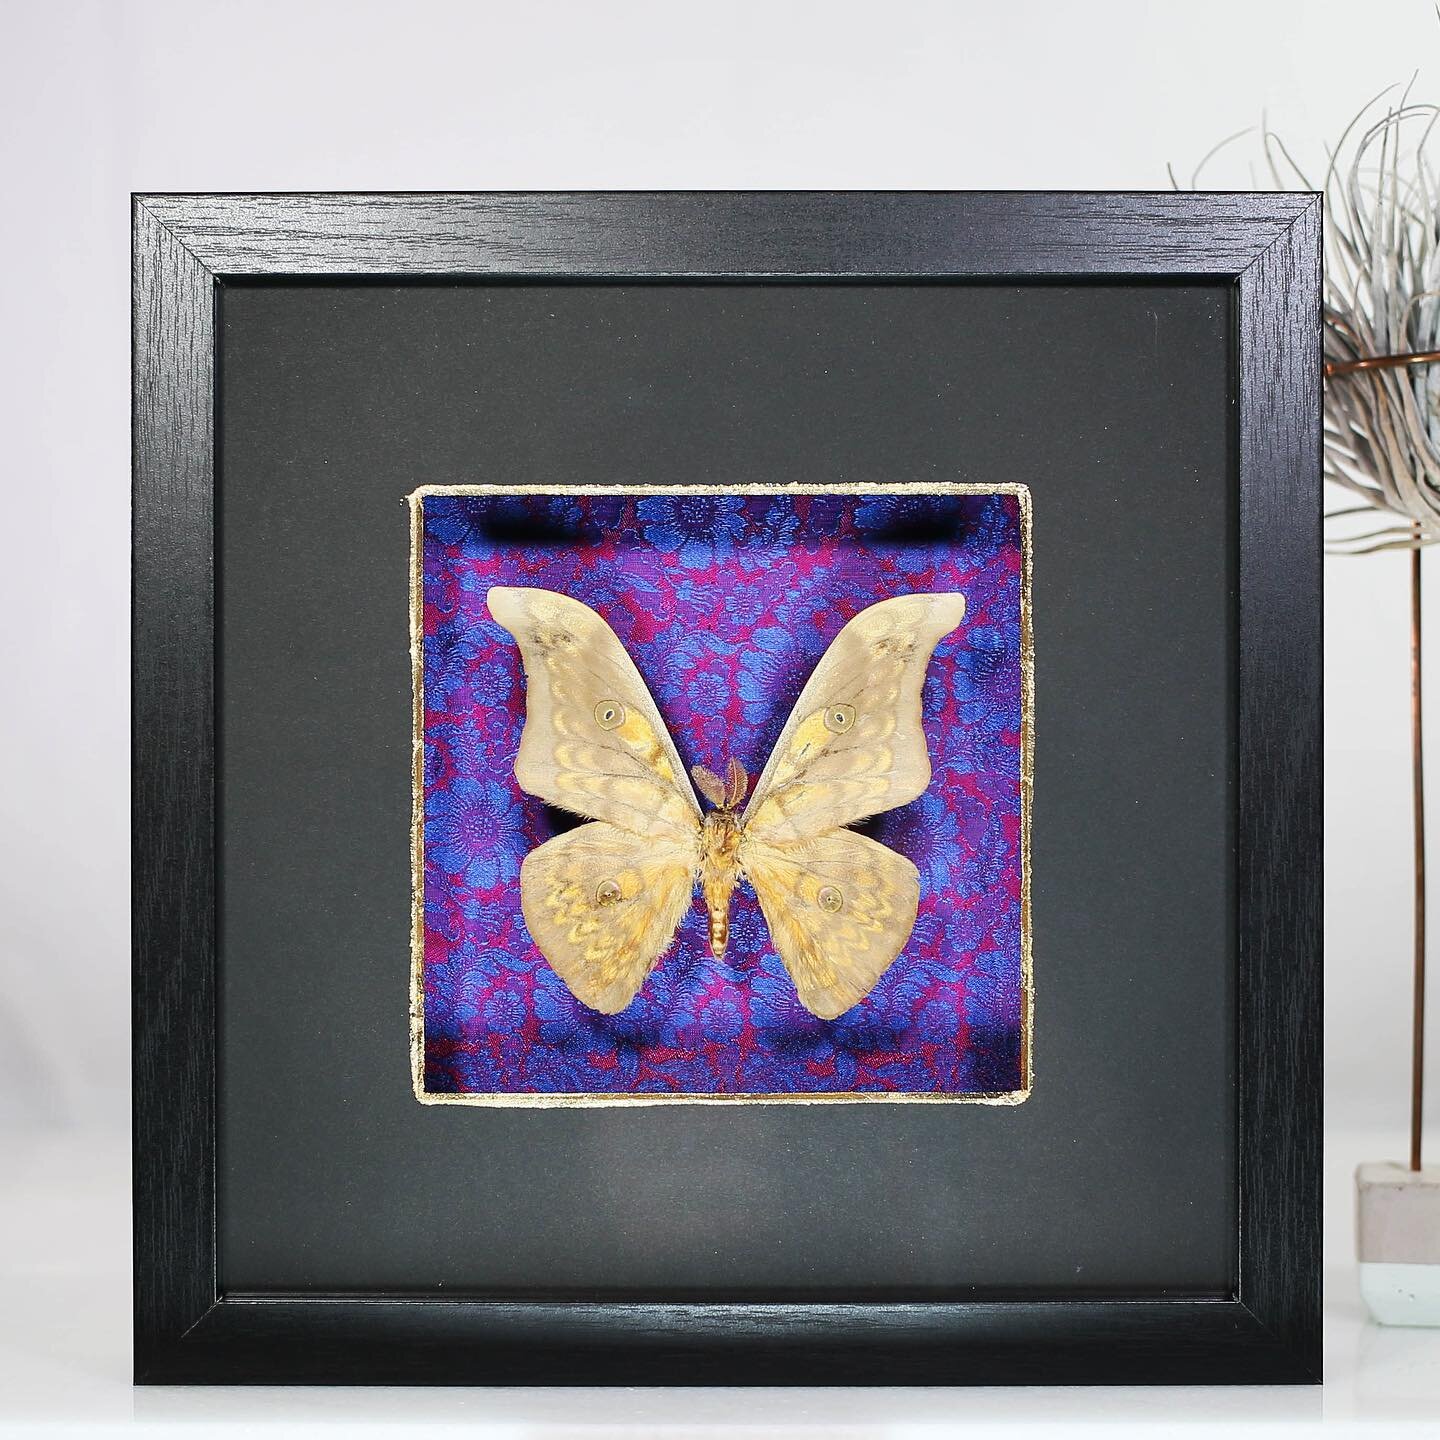 Beautiful Silkmoth on a colorful background! Find this frame among with lots of new frames on the website, Buginthebox.net 

🦋❤️🦋❤️🦋

#animals #naturephotography #butterfliesandflowers
#instagood #butterflies #pet #love #bird #entomology #entomolo